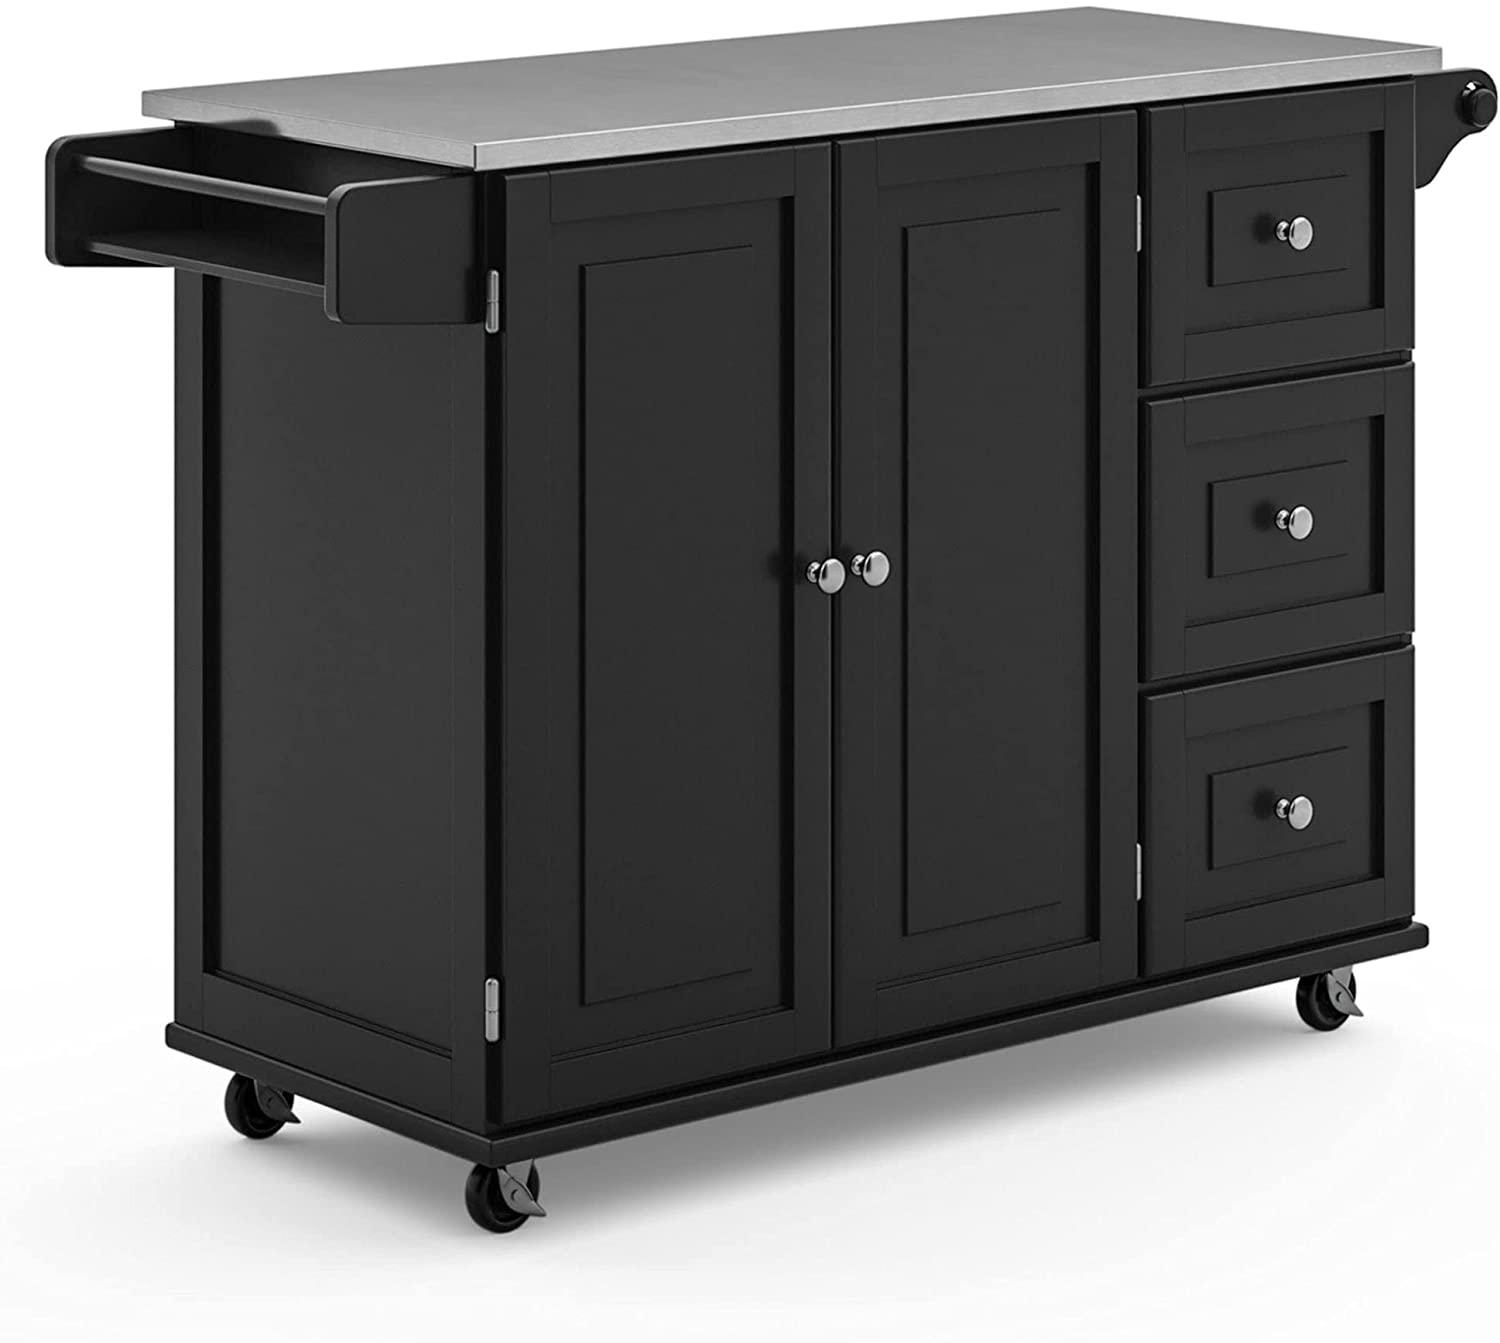 Homestyle Top Kitchen Cart Rolling Mobile Island for $210 Shipped